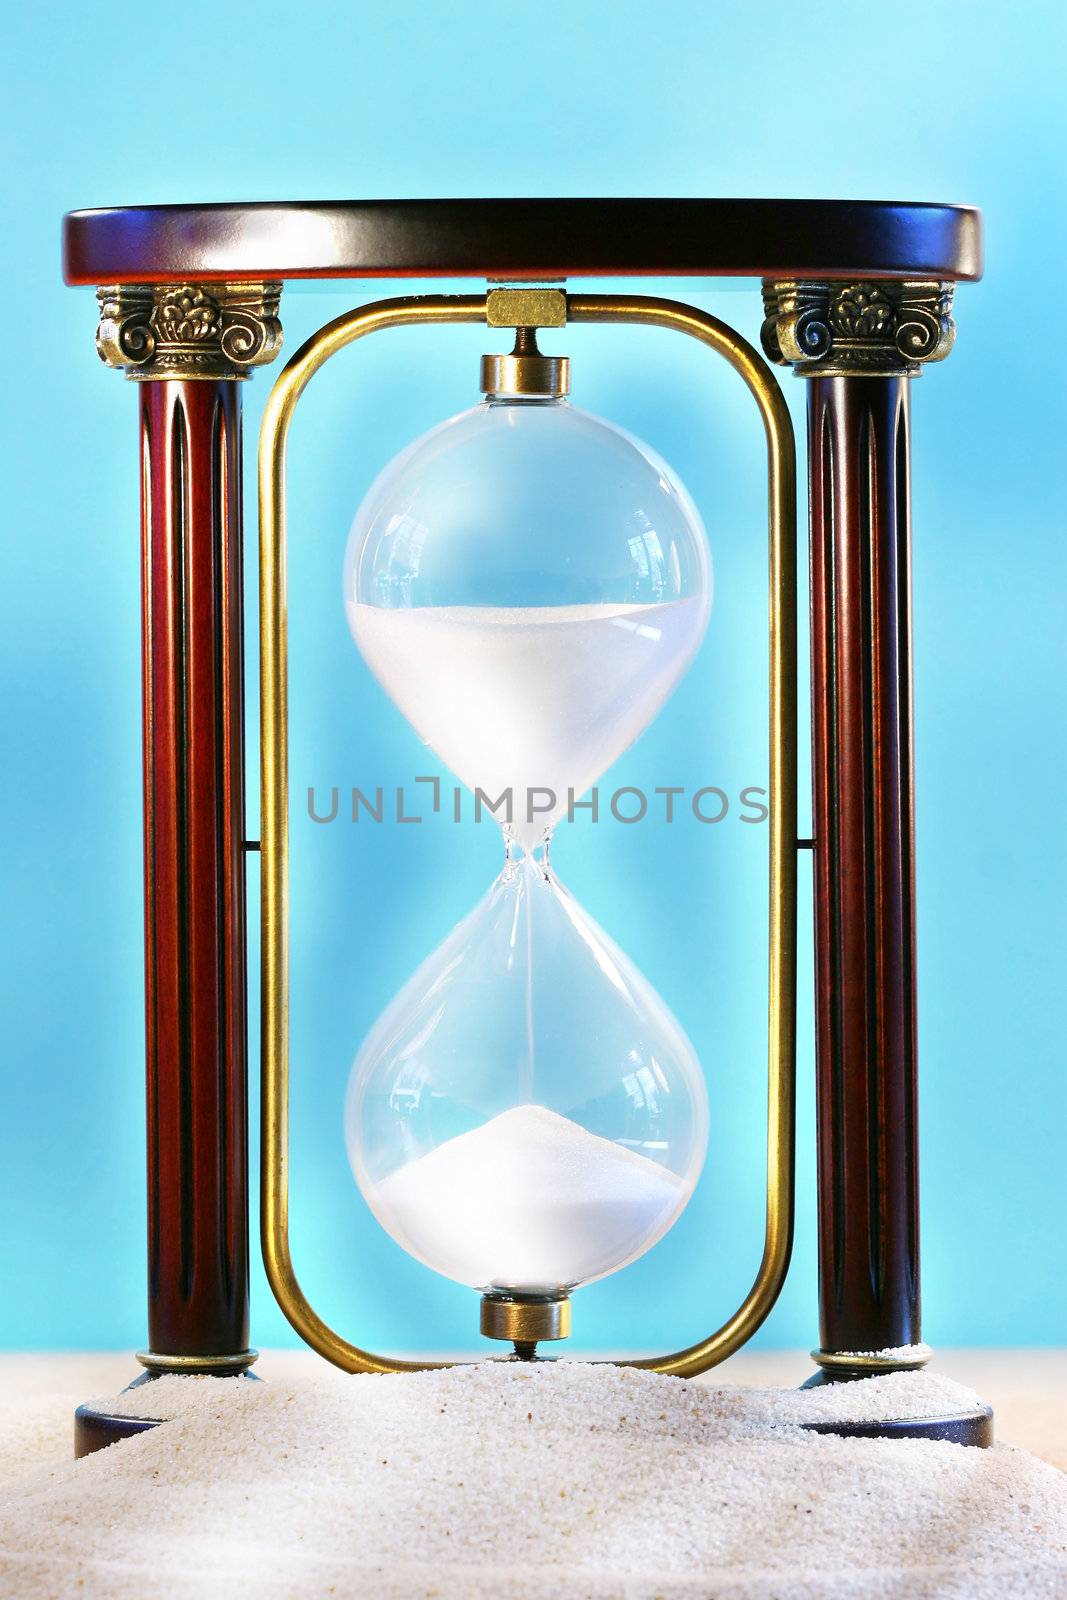 Hourglass resting on beach sand showing sand falling through glass